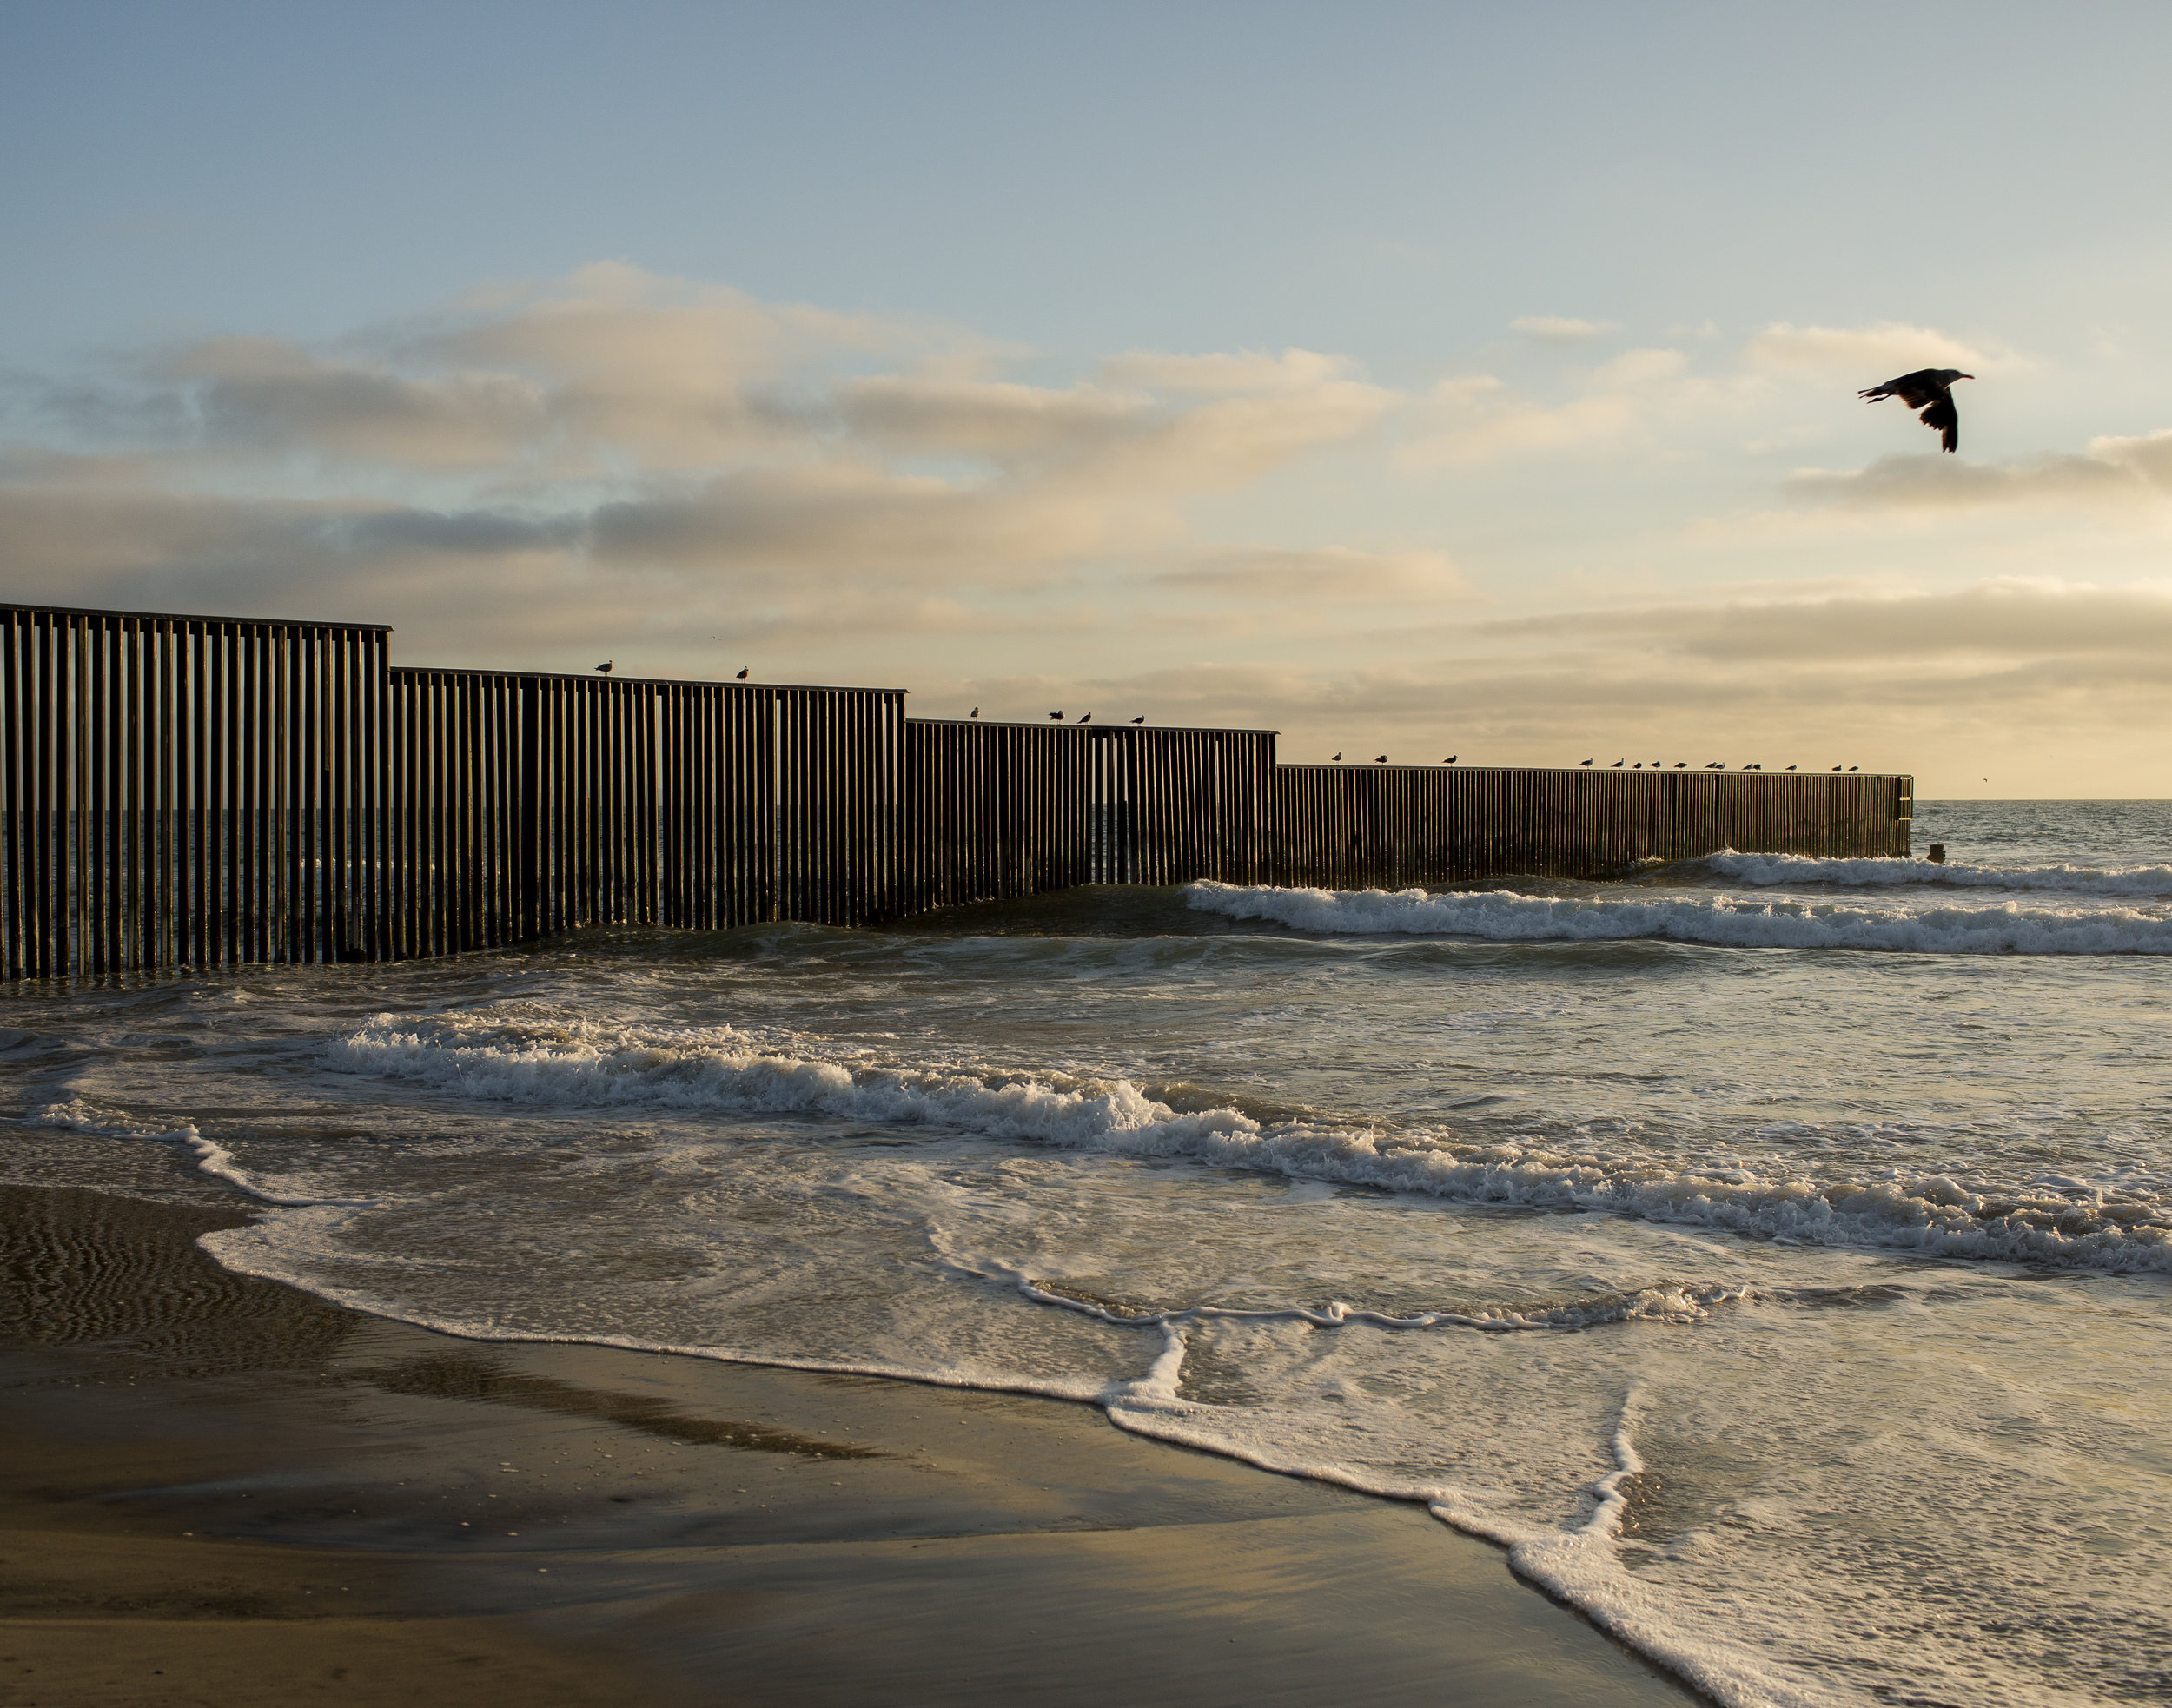  The border fence between the United States and Mexico ends at the ocean in San Diego, California.  